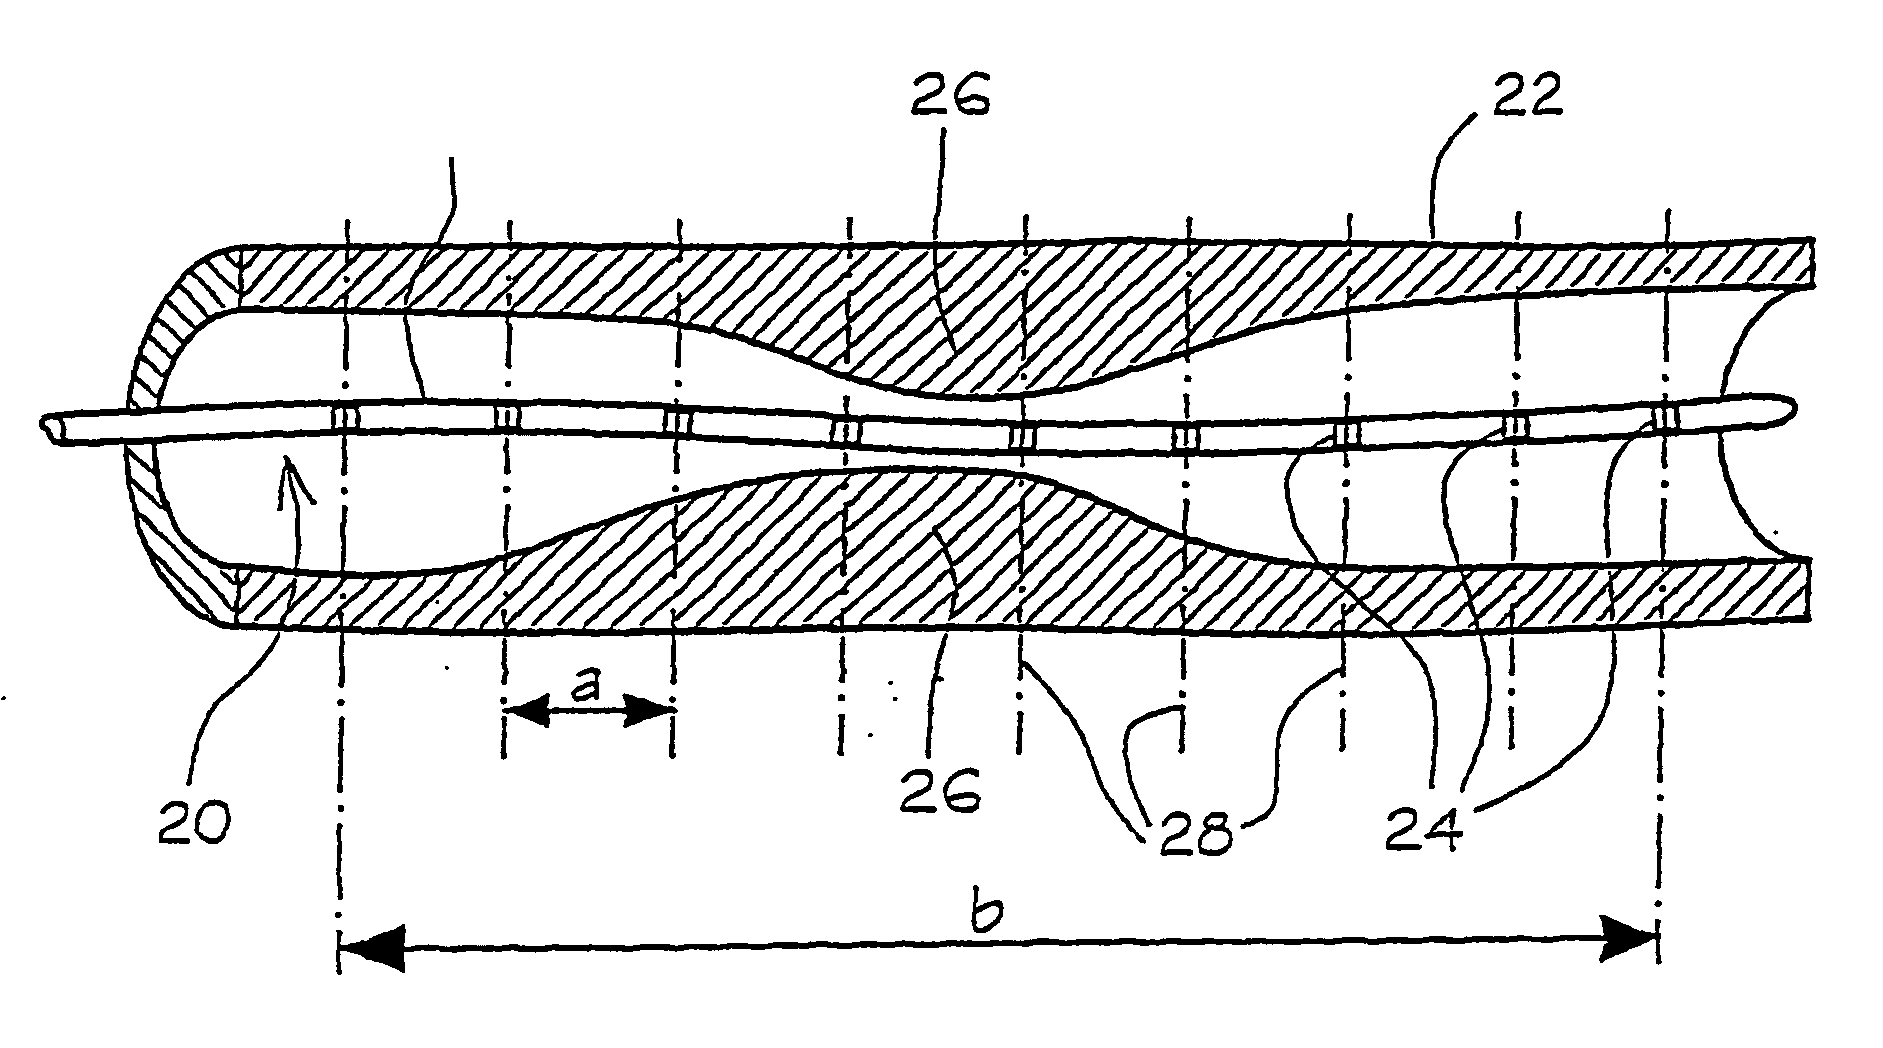 Ultrasonic probing device with distributed sensing elements